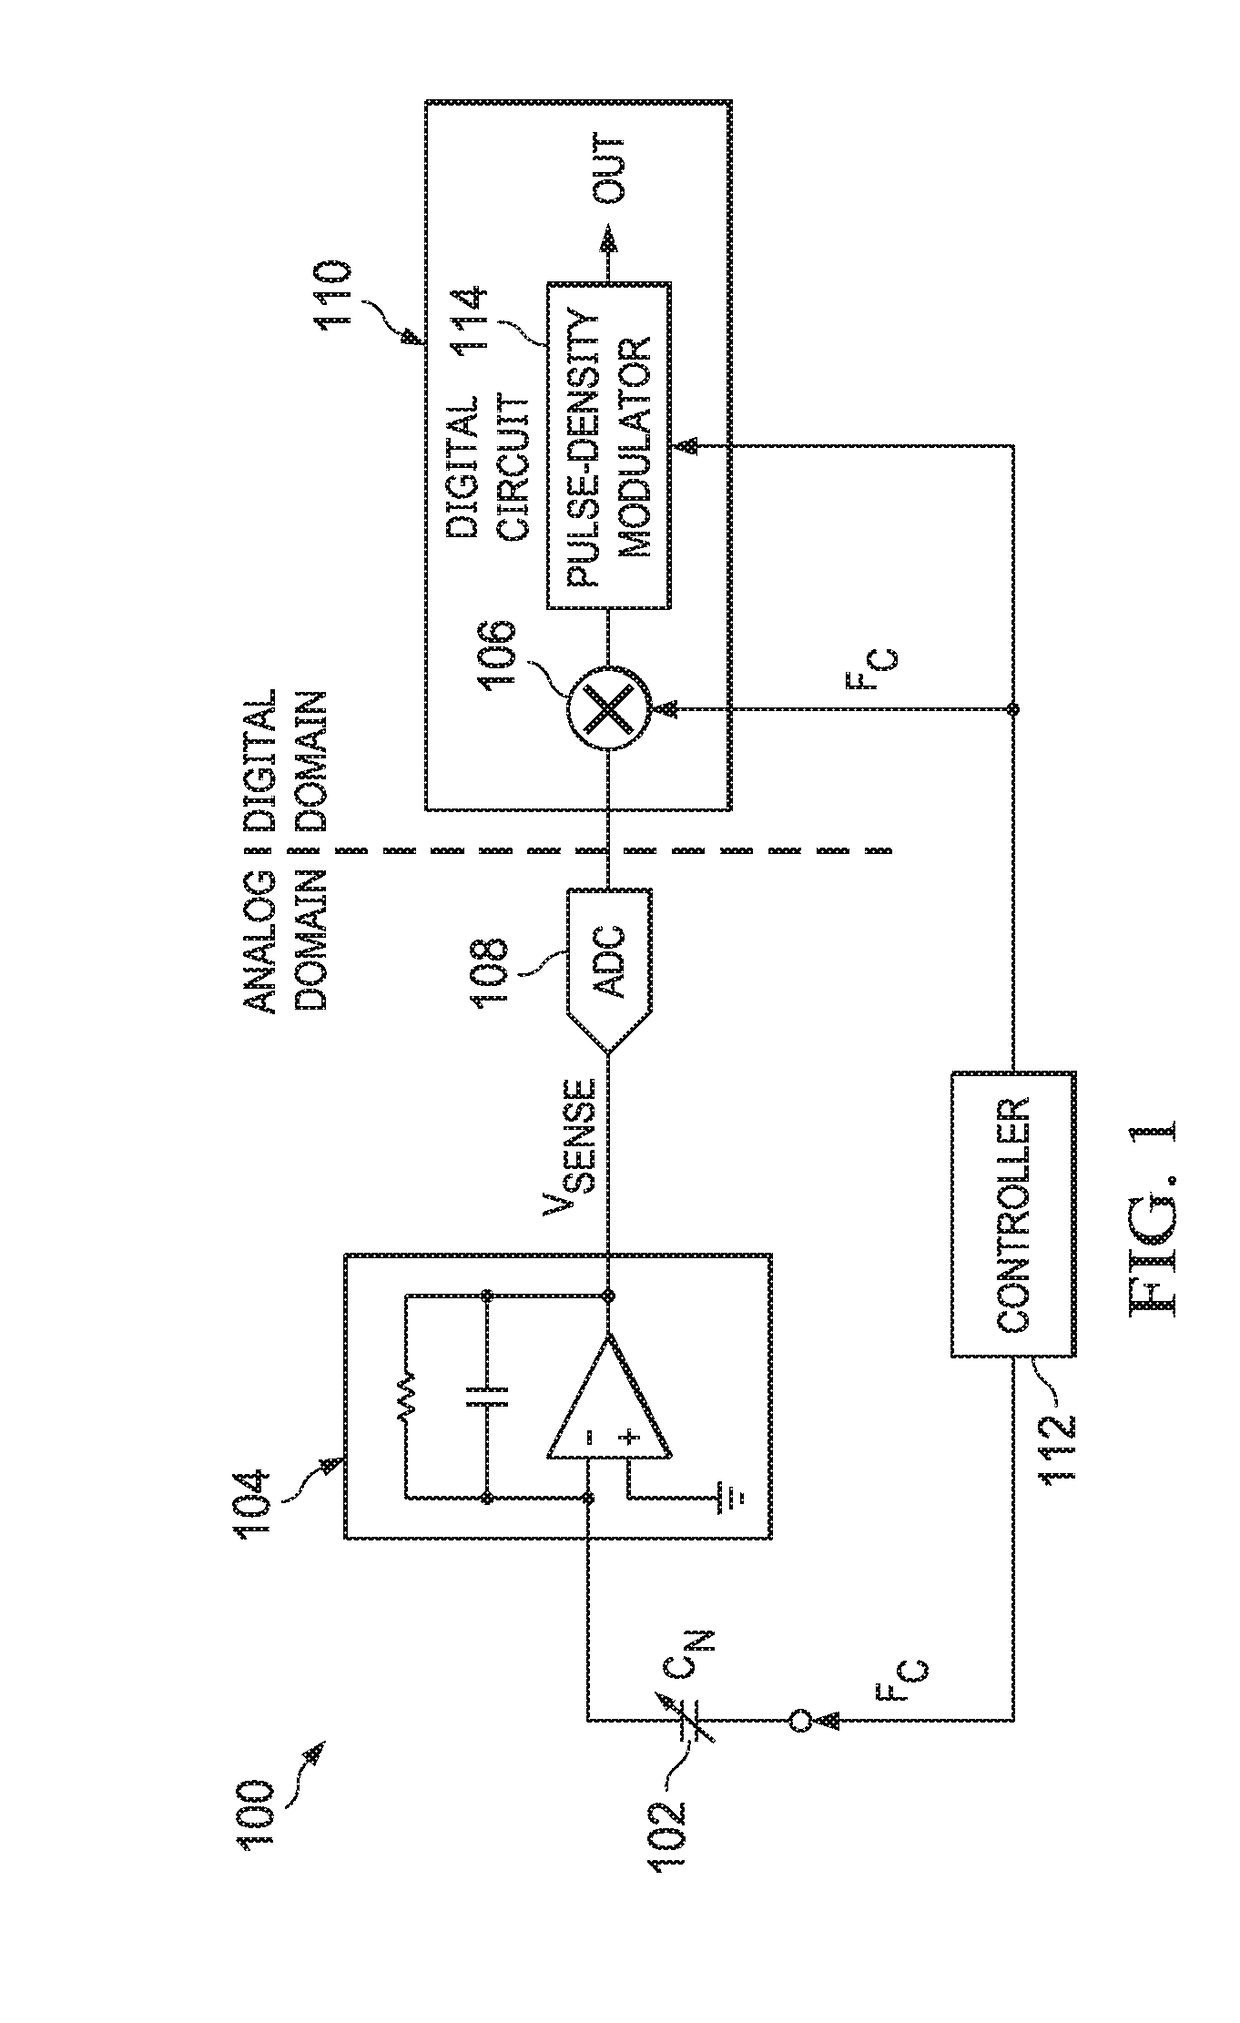 Reducing noise in a capacitive sensor with a pulse density modulator